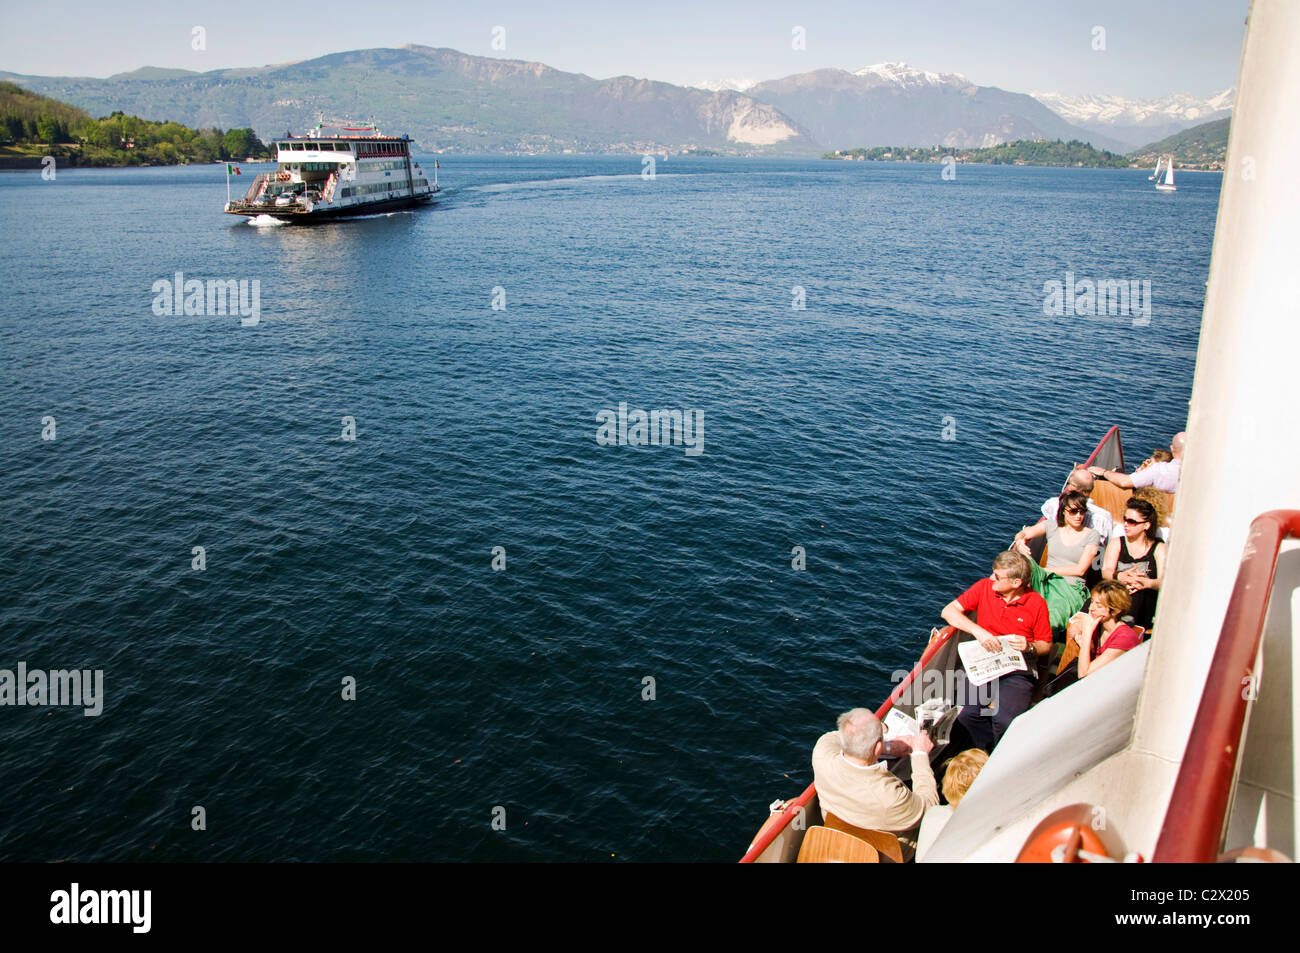 Car ferries pass on Lake Maggiore Stock Photo